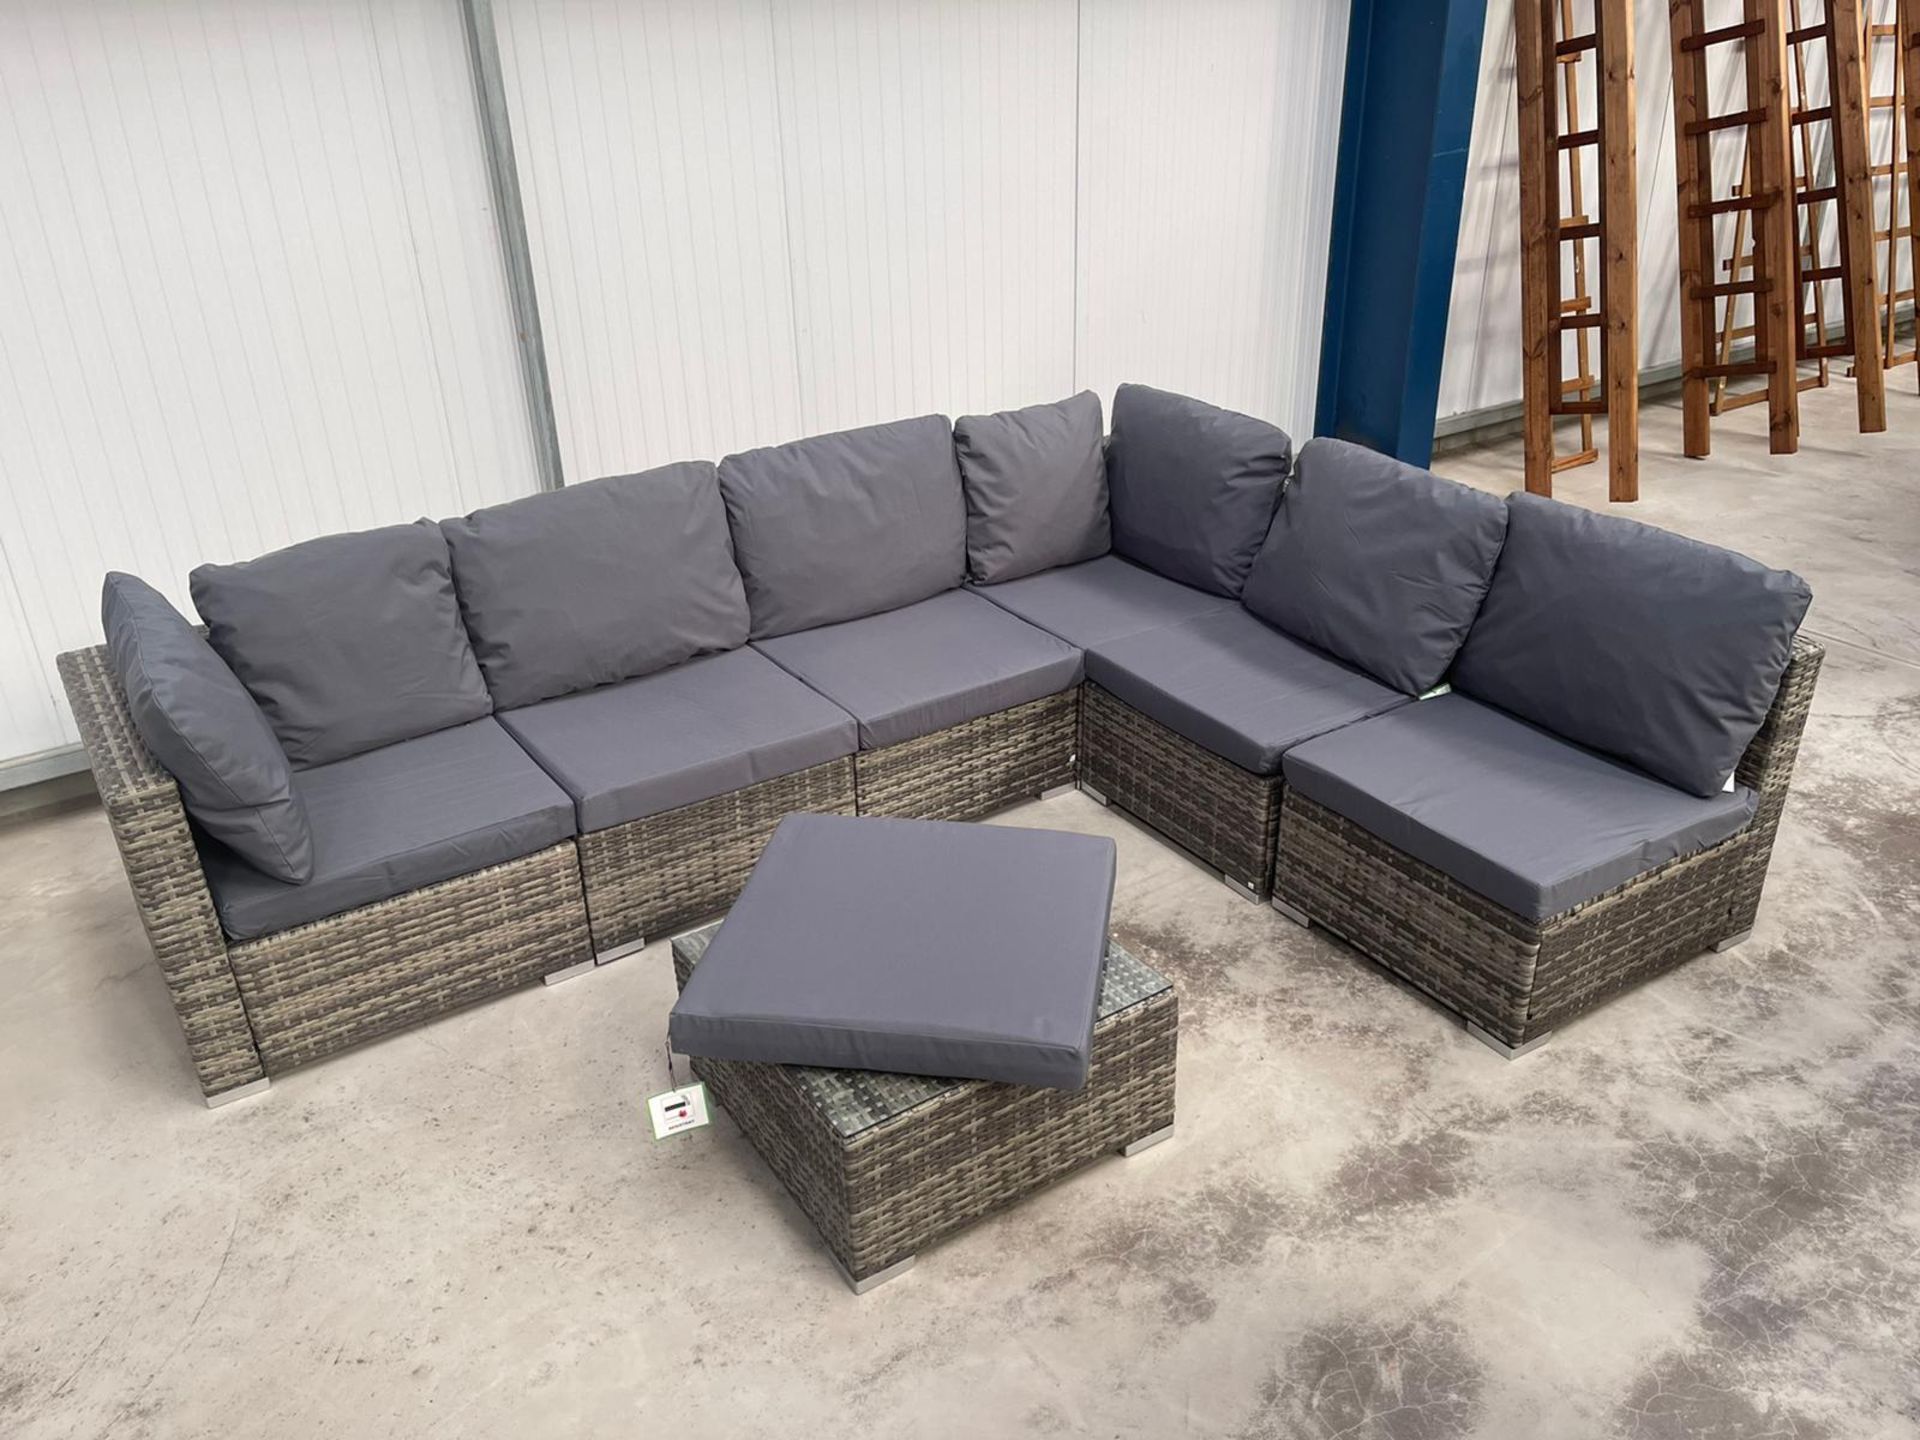 RRP £899 - NEW GREY U-SHAPED MODULAR SOFA WITH GLASS TOPPED COFFEE TABLE. VERY VERSITILE SET THAT - Image 4 of 9